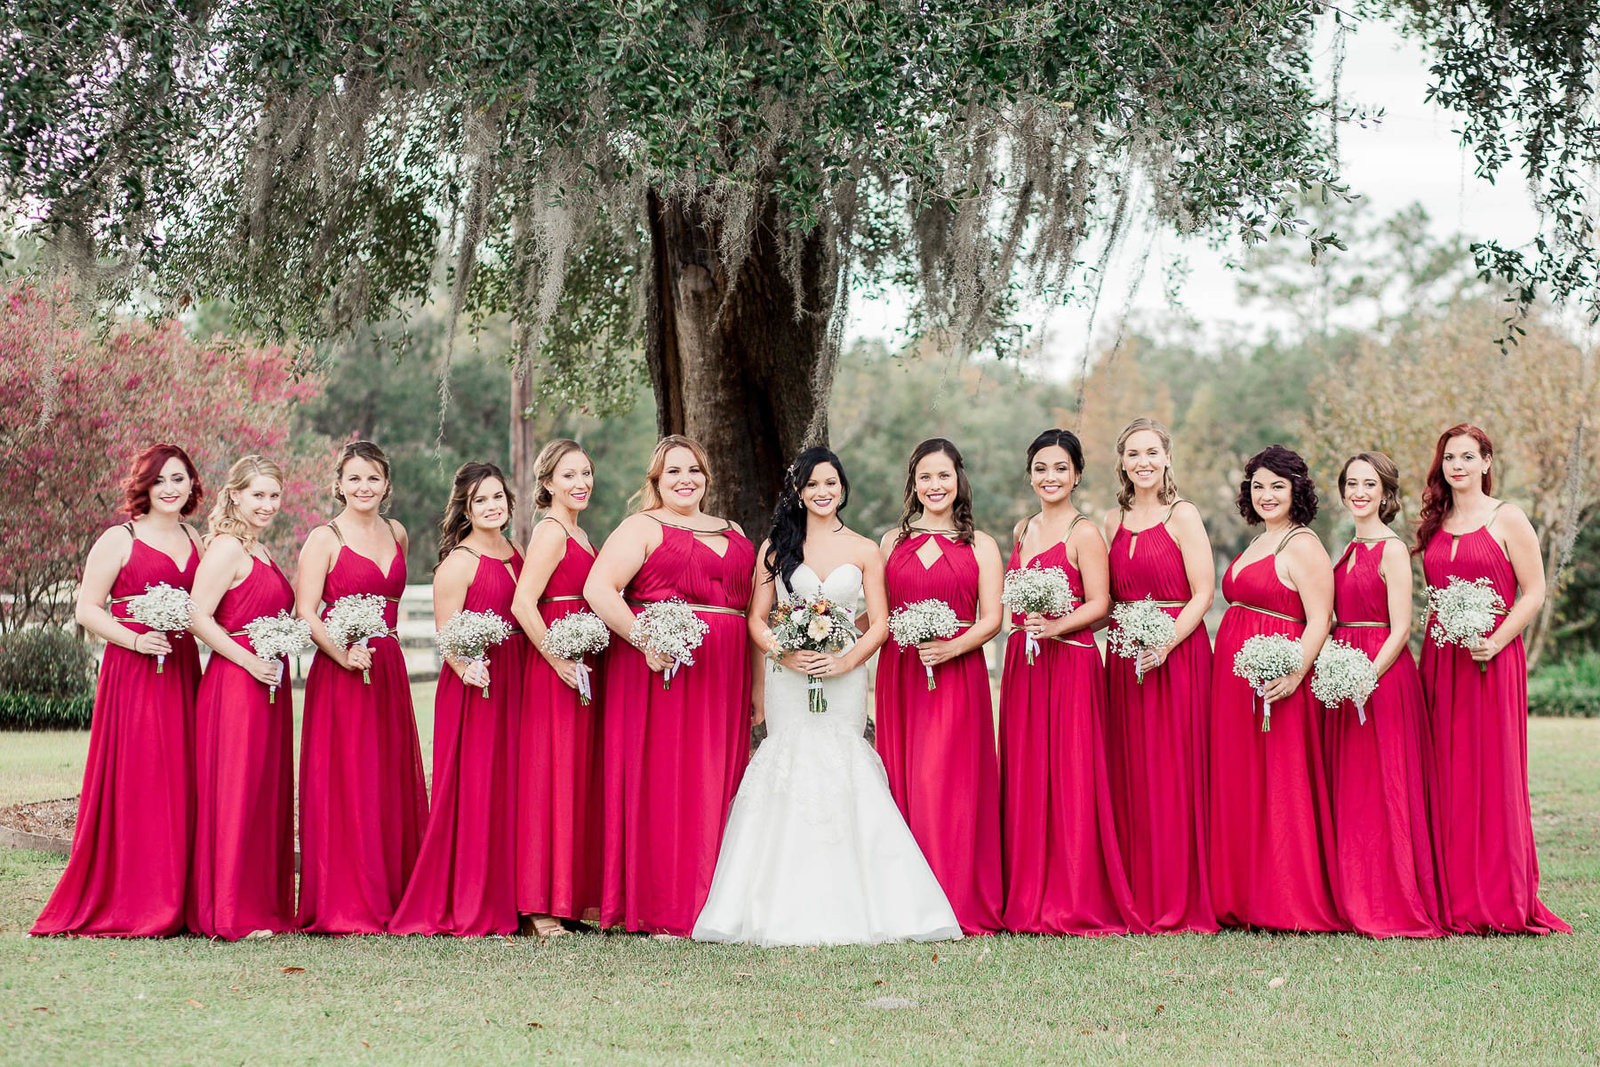 Bride and bridesmaids pose together, Boals Farm, Charleston Wedding Photography